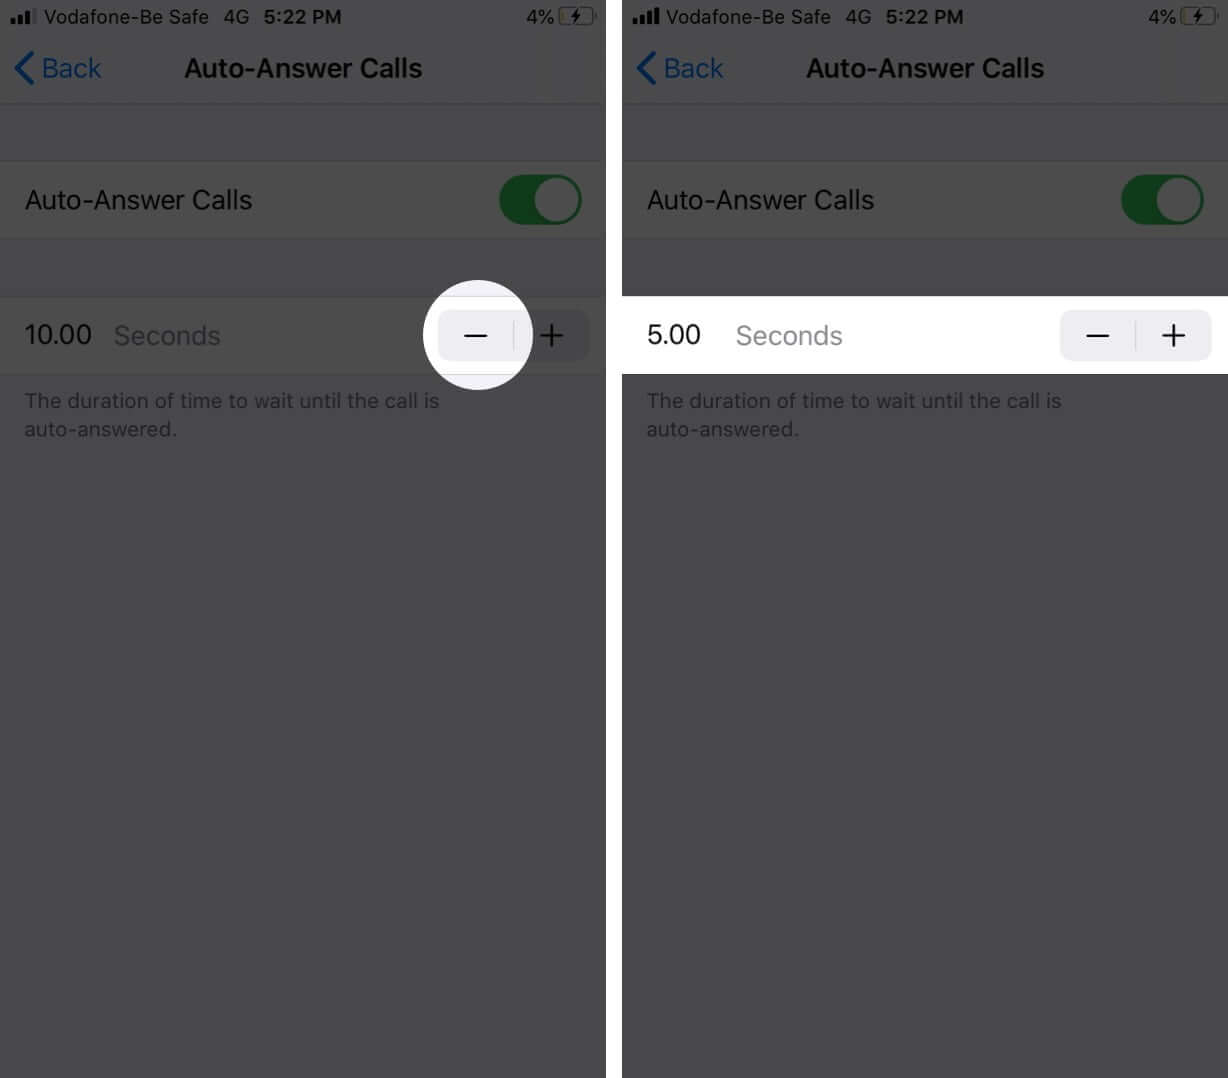 Tap on Minus to Decrease Time Duration for Auto-Answer Calls on iPhone